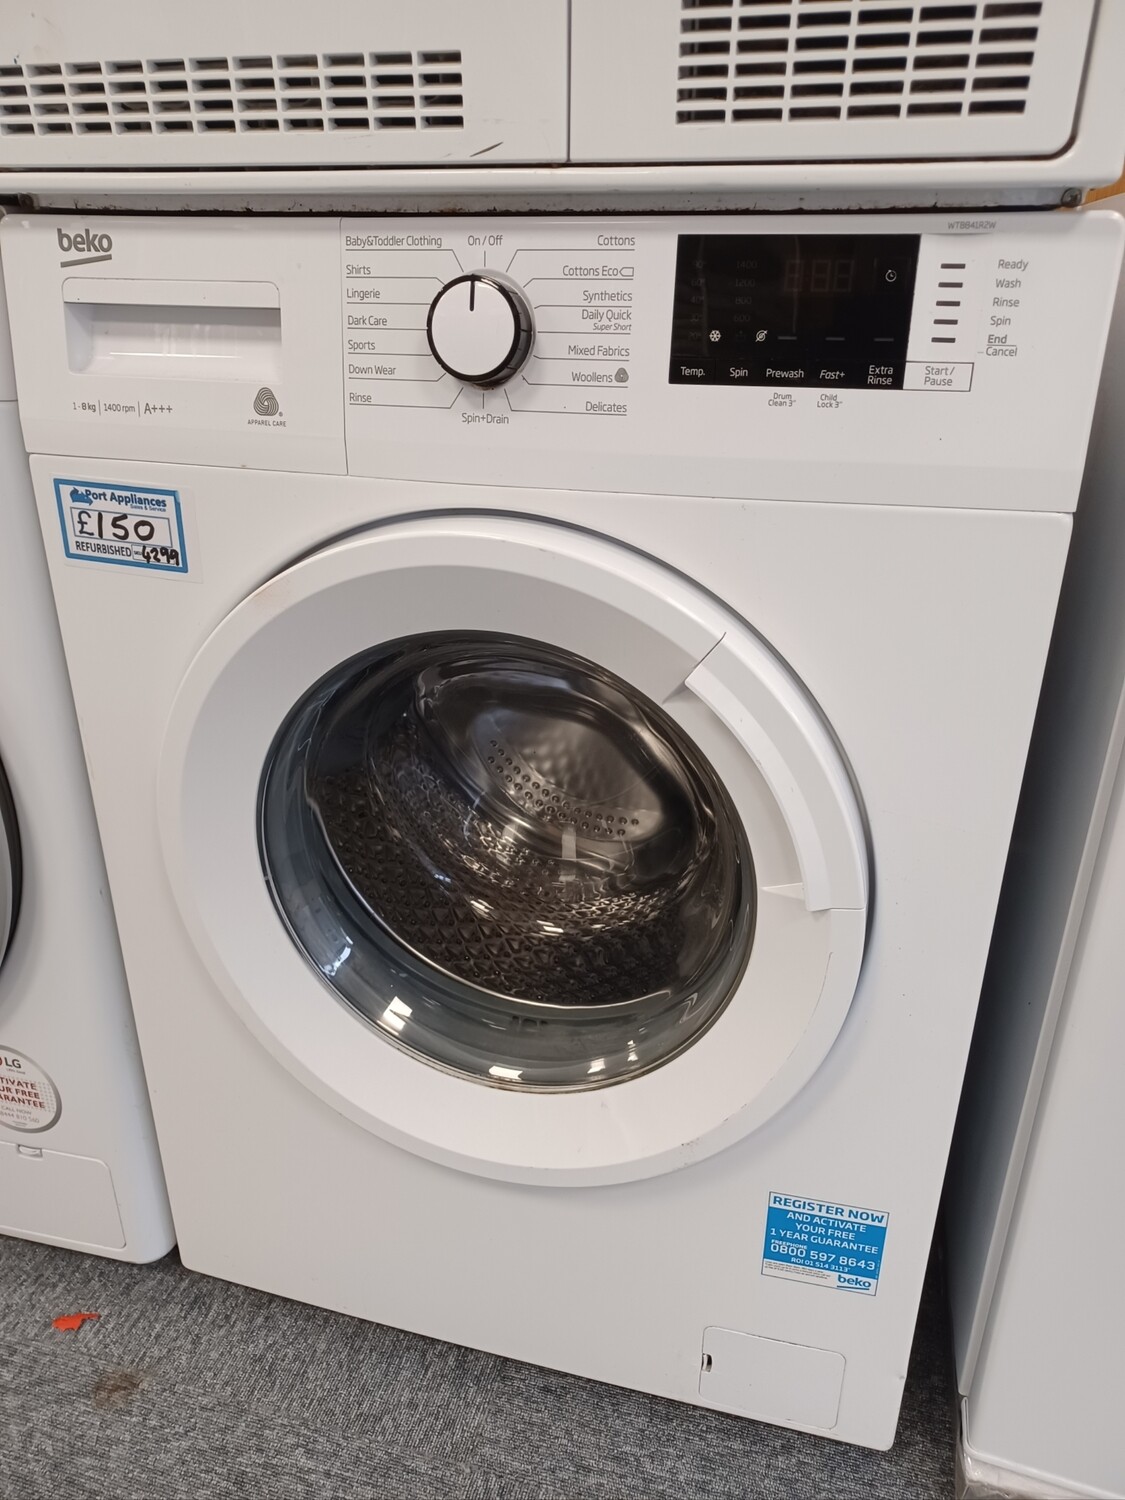 Beko A+++ 8kg Load, 1400 Spin Washing Machine - White - Refurbished - 6 Month Guarantee. Located In our Whitby Road Shop